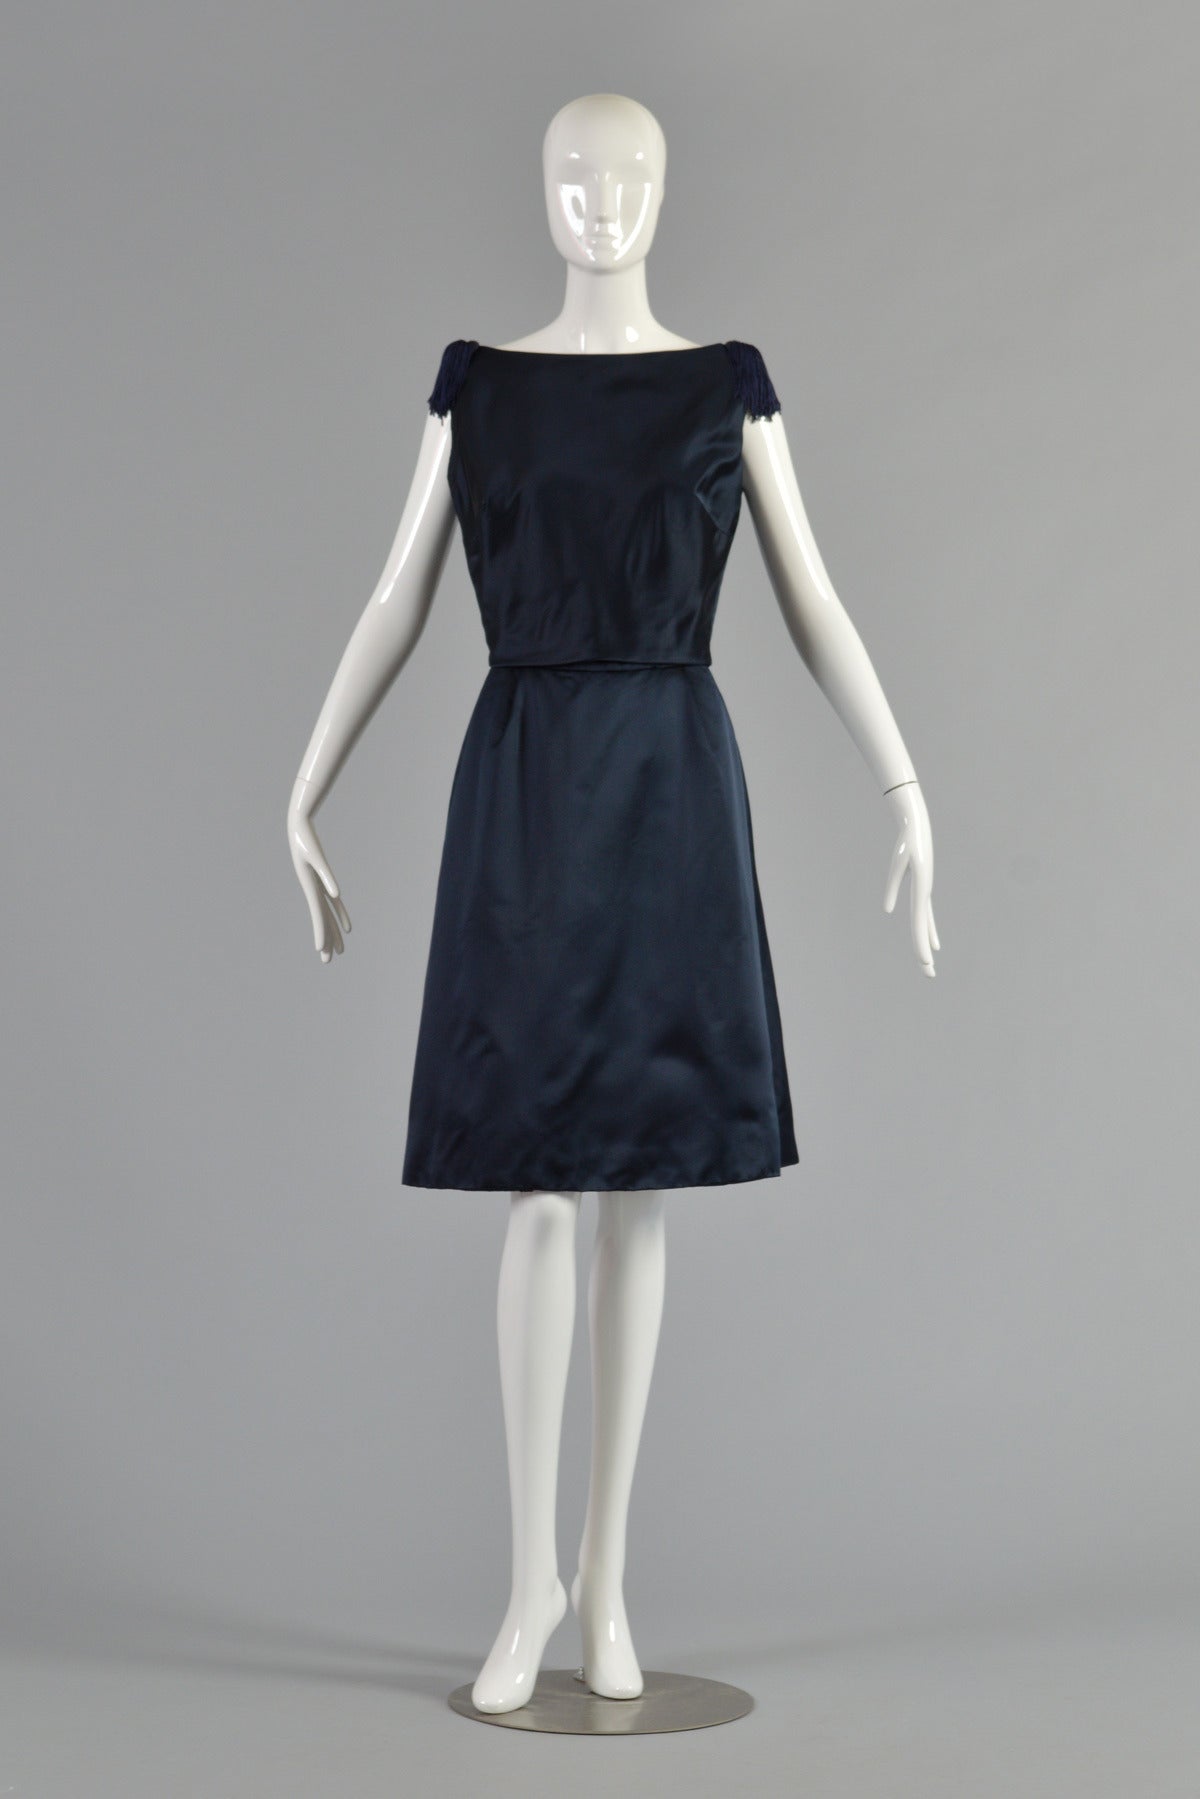 Beautiful vintage 1950/60s cocktail dress by Karen Stark for Harvey Berin. Gorgeous midnight blue silk satin. Tiered bodice with button back. Fringed tassels at shoulders. Panel-front skirt. A stunning + versatile dress. Excellent condition. Best